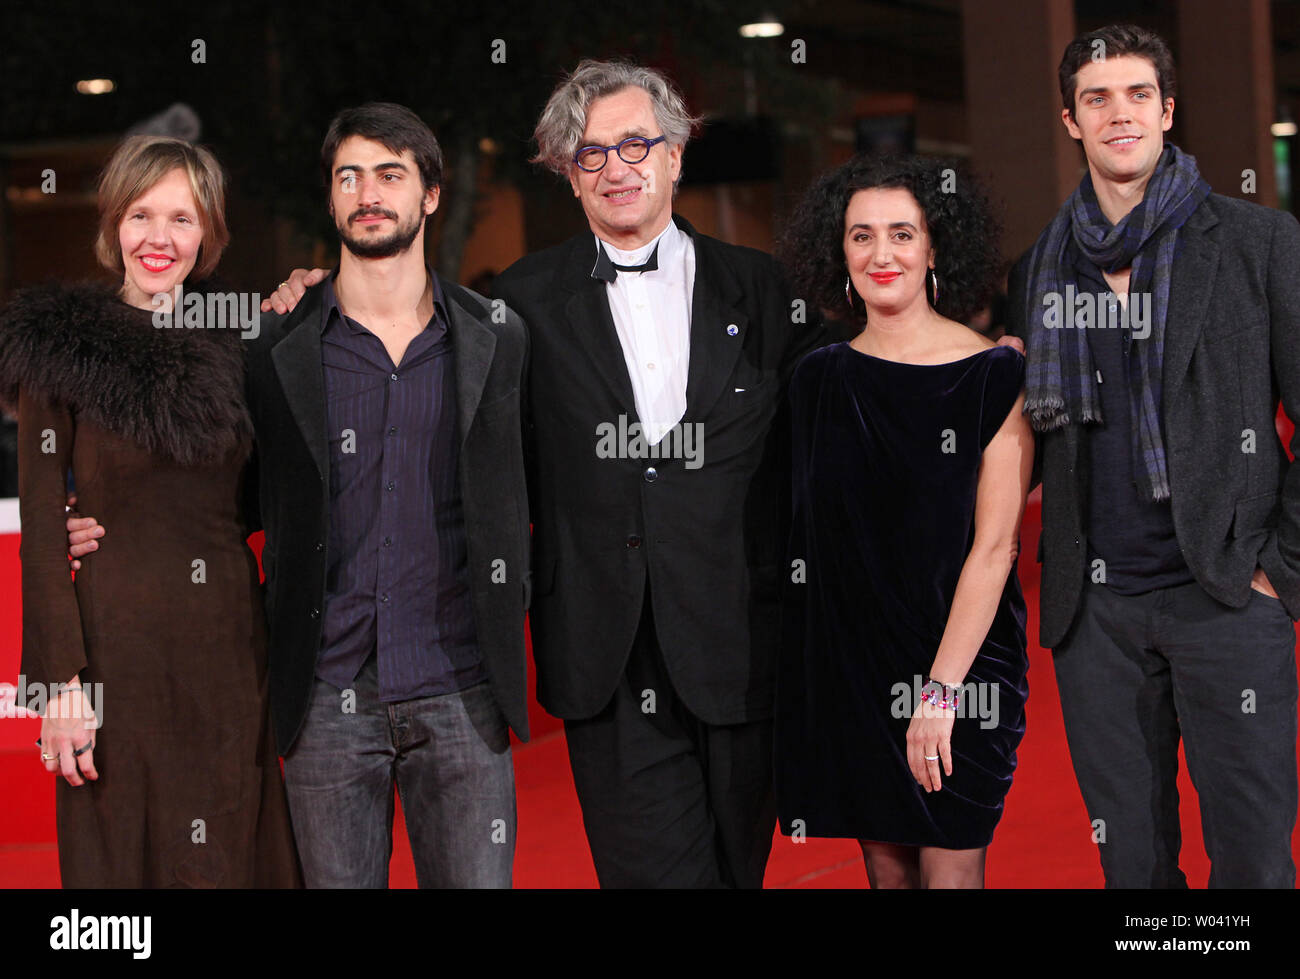 (From L to R) Donata Wenders, Damiano Ottavio Bigi, Wim Wenders, Cristiana Morganti and Roberto Bolle arrive on the red carpet before a screening of the film 'Pina' during the 6th Rome International Film Festival in Rome on October 31, 2011.   UPI/David Silpa Stock Photo